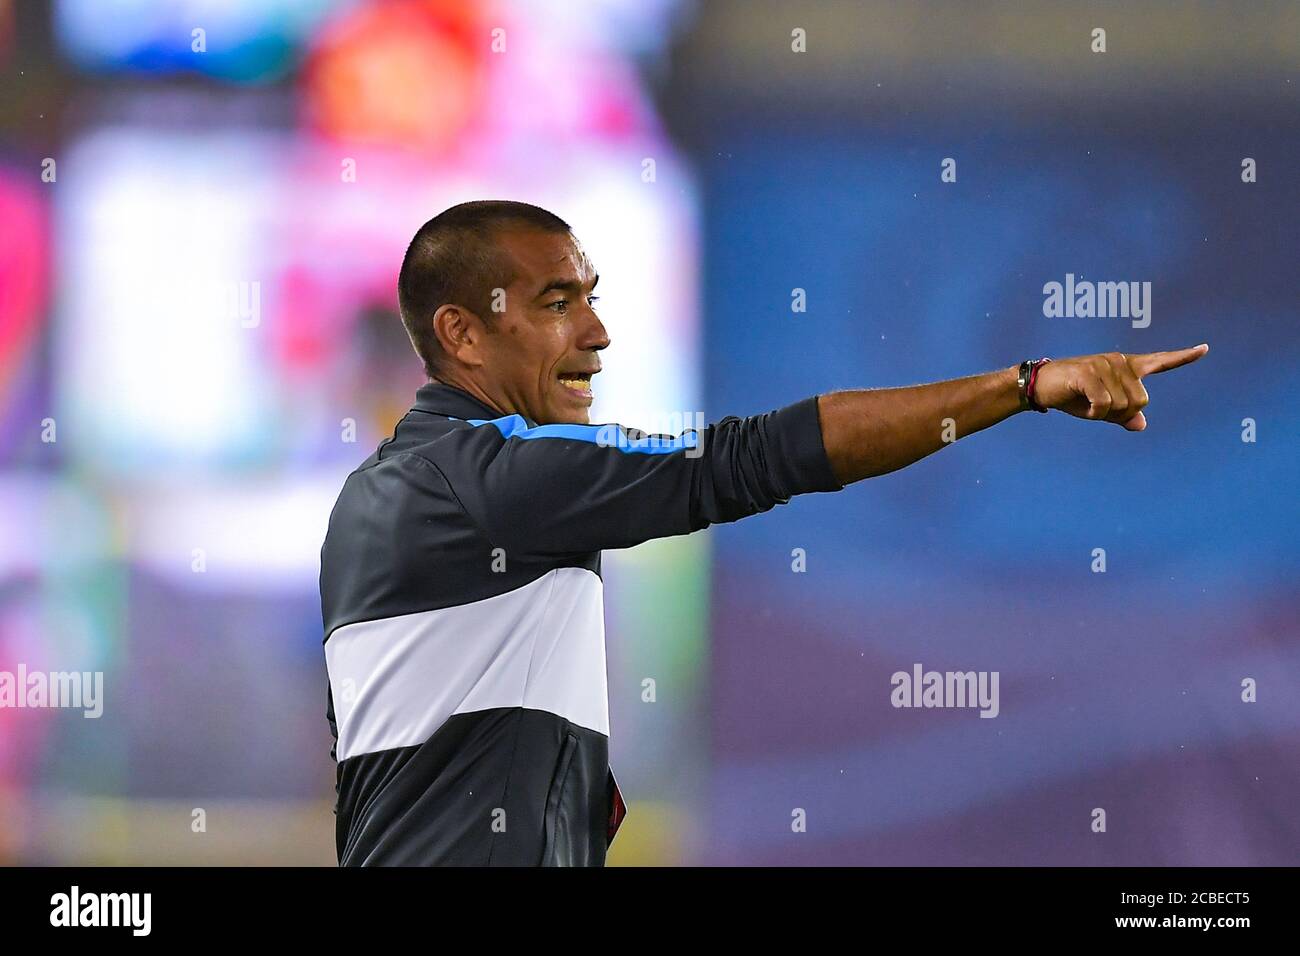 The manager of Guangzhou R&F Giovanni van Bronckhorst watches the third-round match of 2020 Chinese Super League (CSL) against Henan Jianye F.C., Dalian city, northeast China's Liaoning province, 5 August 2020. Henan Jianye F.C. and Guangzhou R&F F.C. drew the game with 1-1. Stock Photo